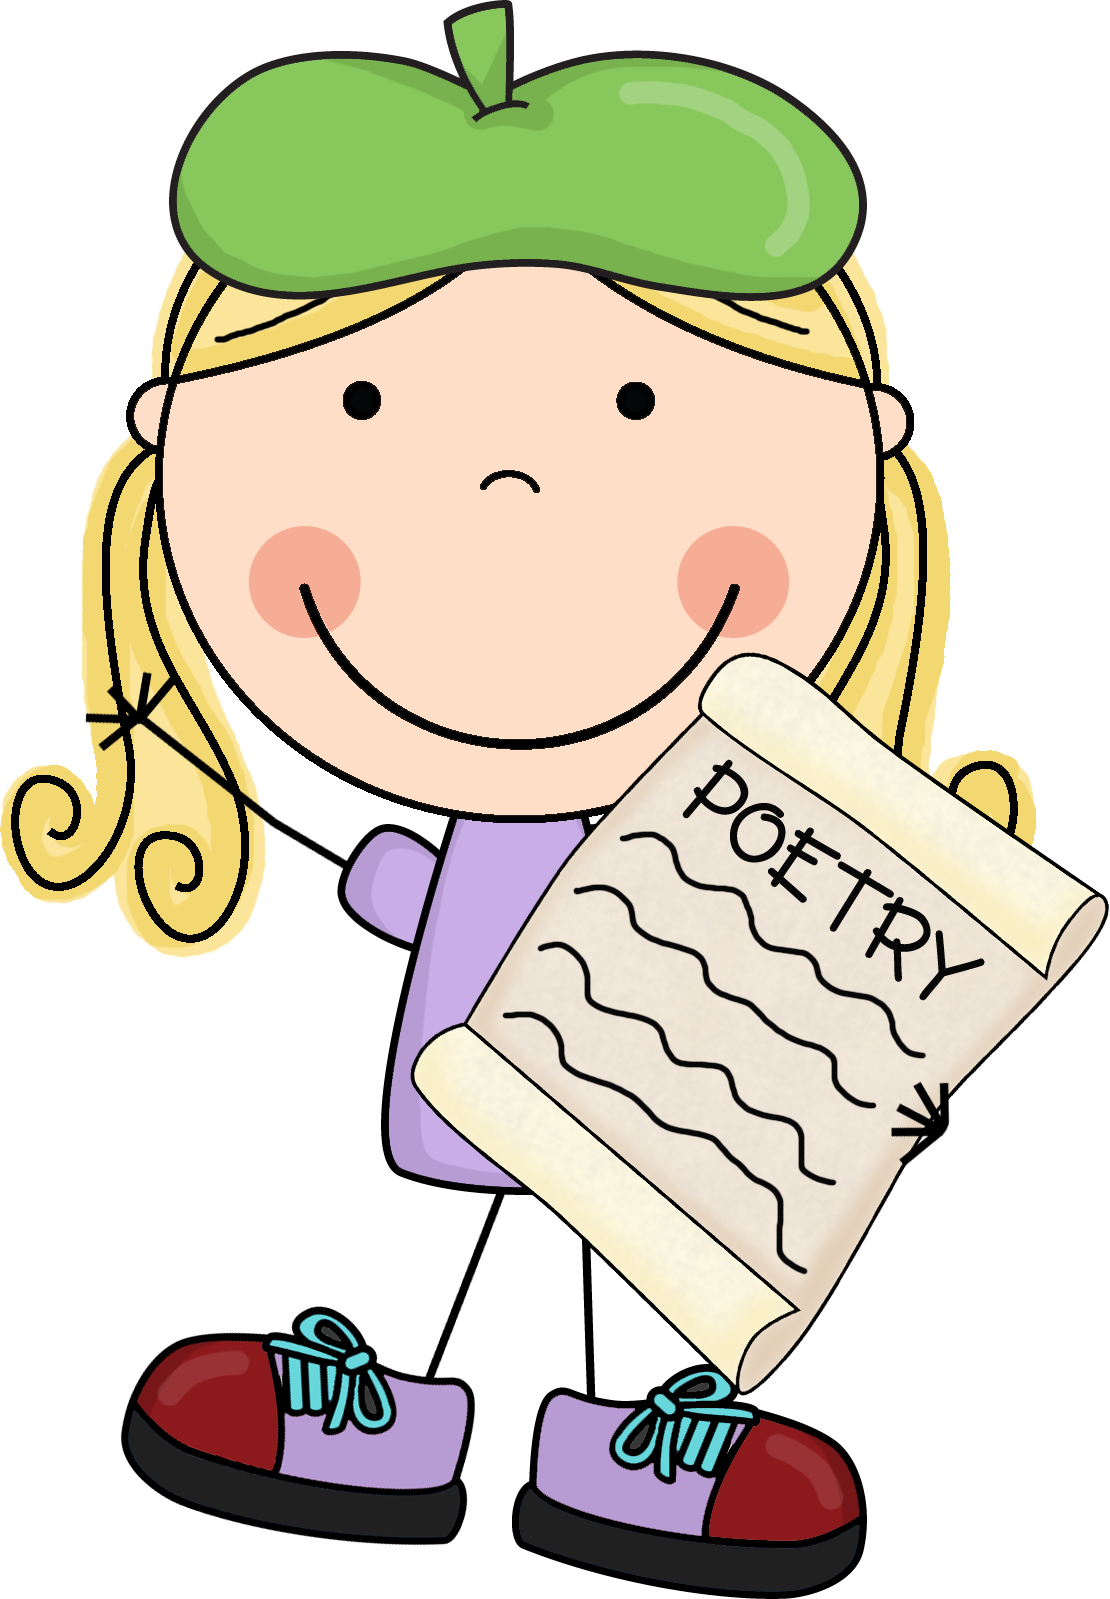 Poetry Book Sign Clip Art. po - Poetry Clip Art